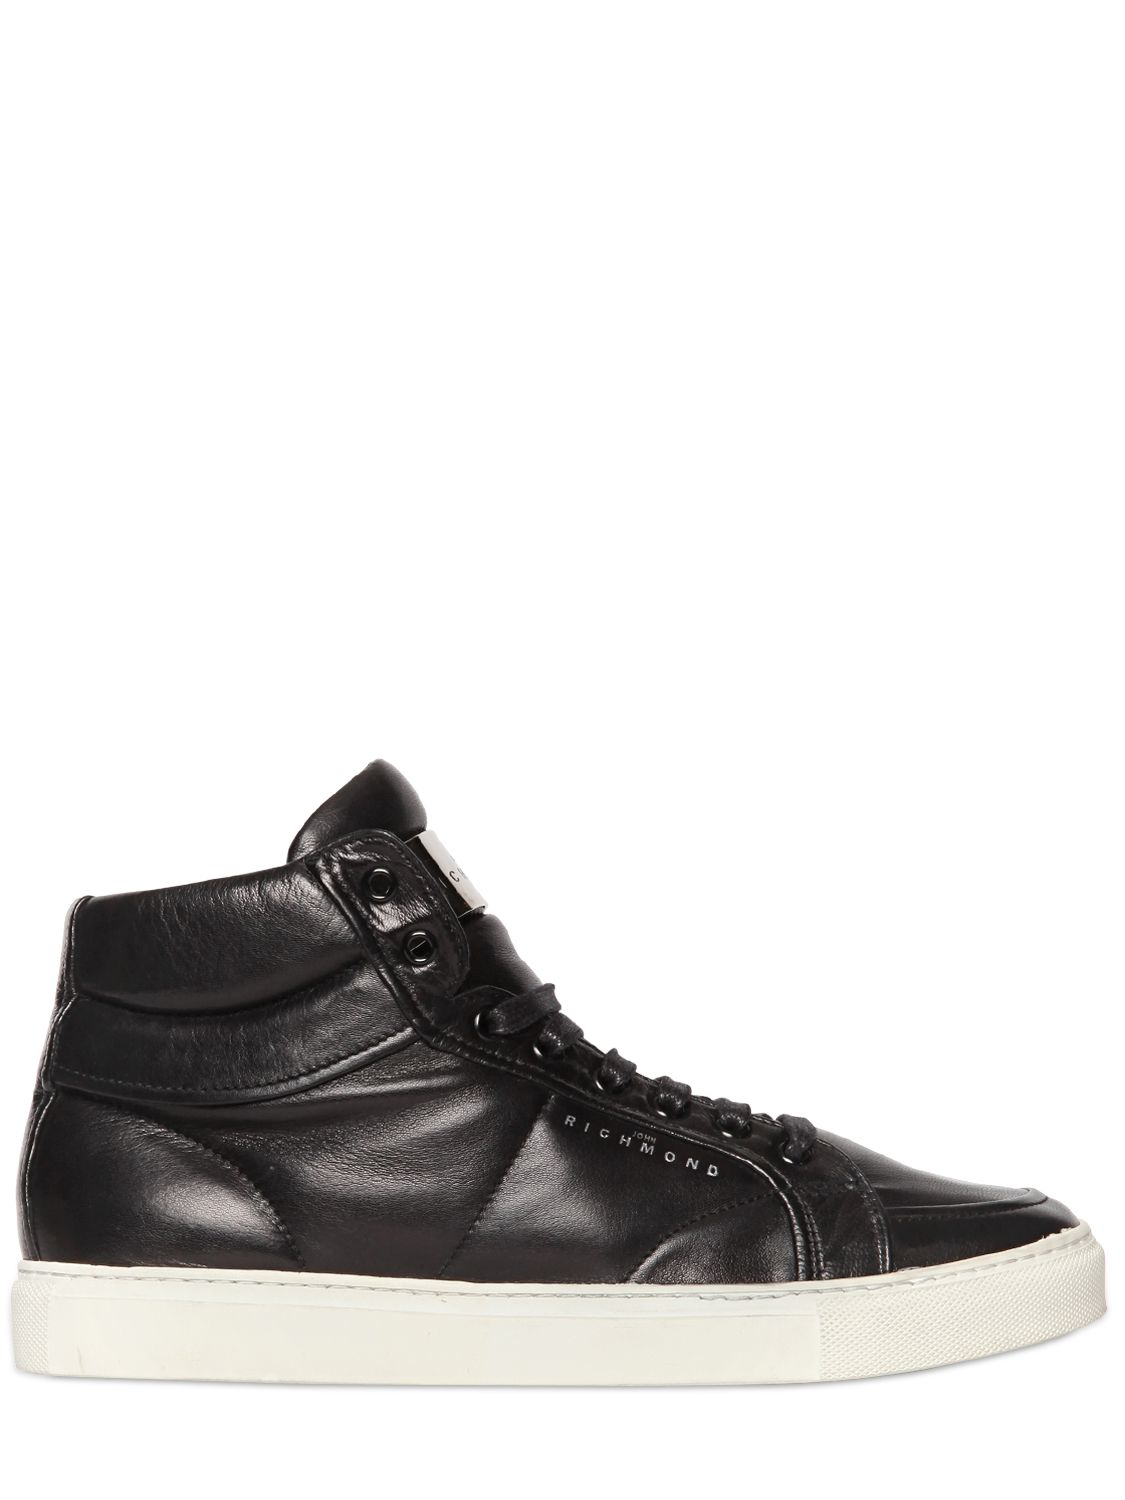 John richmond Nappa Leather High Top Sneakers in Black for Men | Lyst